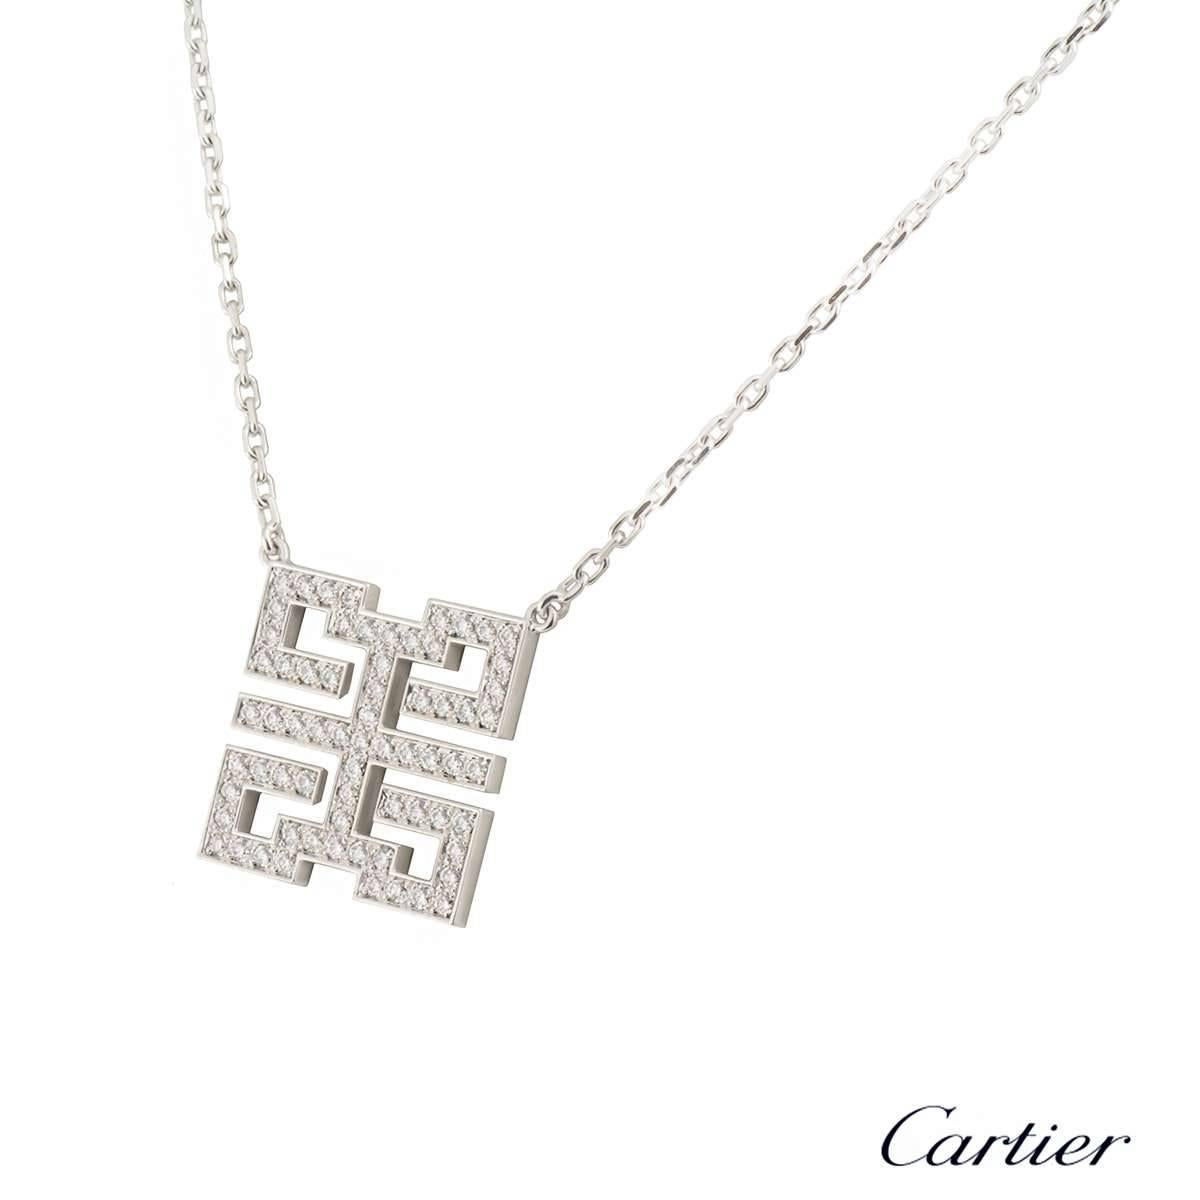 A stylish 18k white gold pendant by Cartier from the Le Baiser Du Dragon collection. The pendant features the dragon motif with 67 round brilliant cut diamonds pave set with a total weight of 0.87ct, G-H colour and VS clarity. The pendant comes with